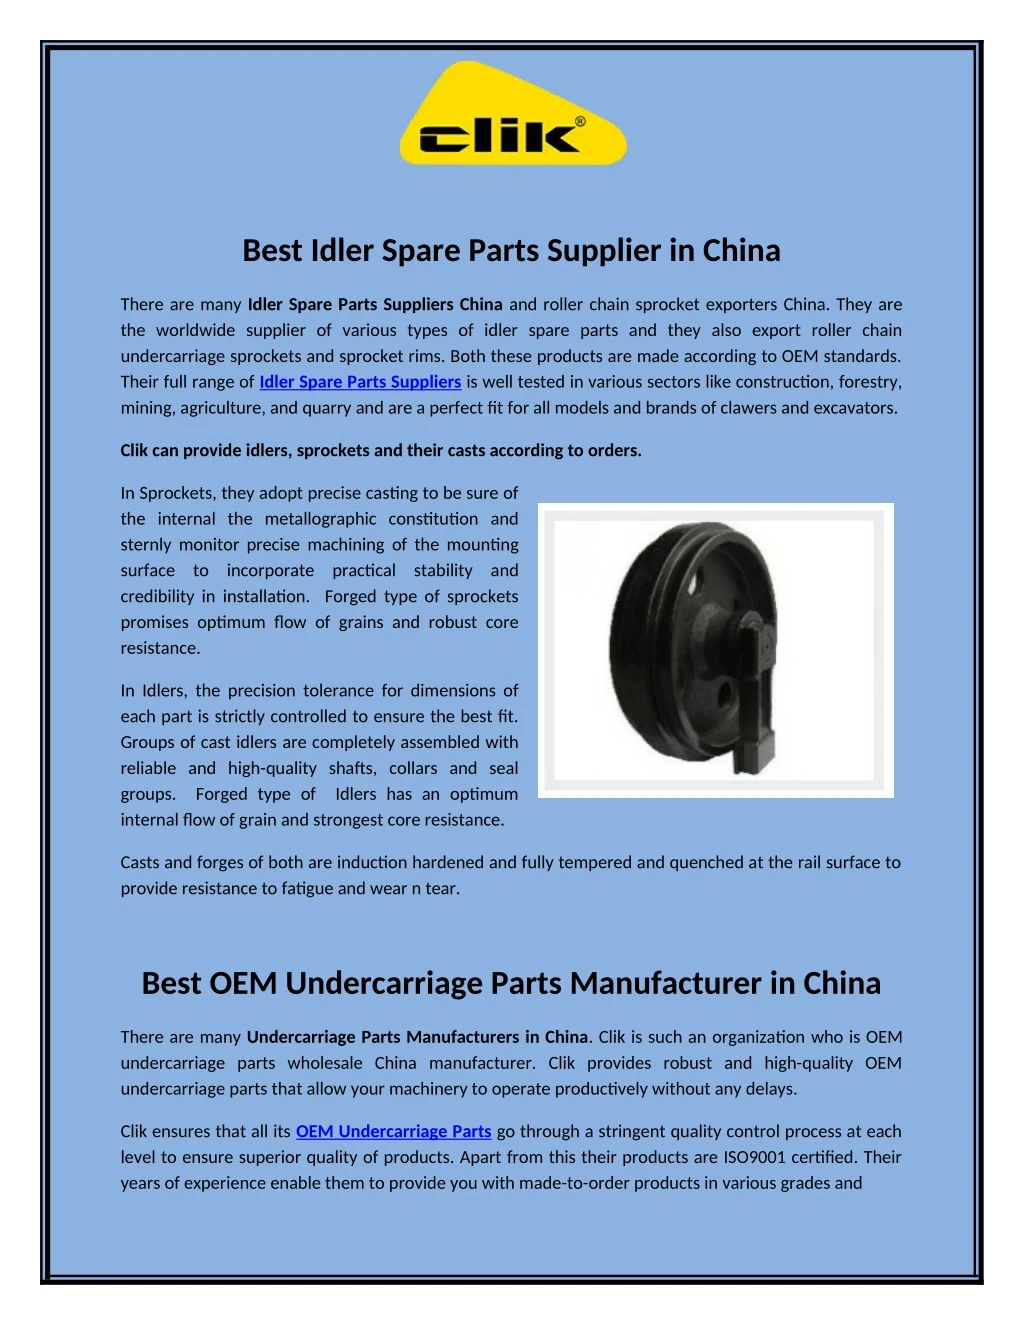 best idler spare parts supplier in china